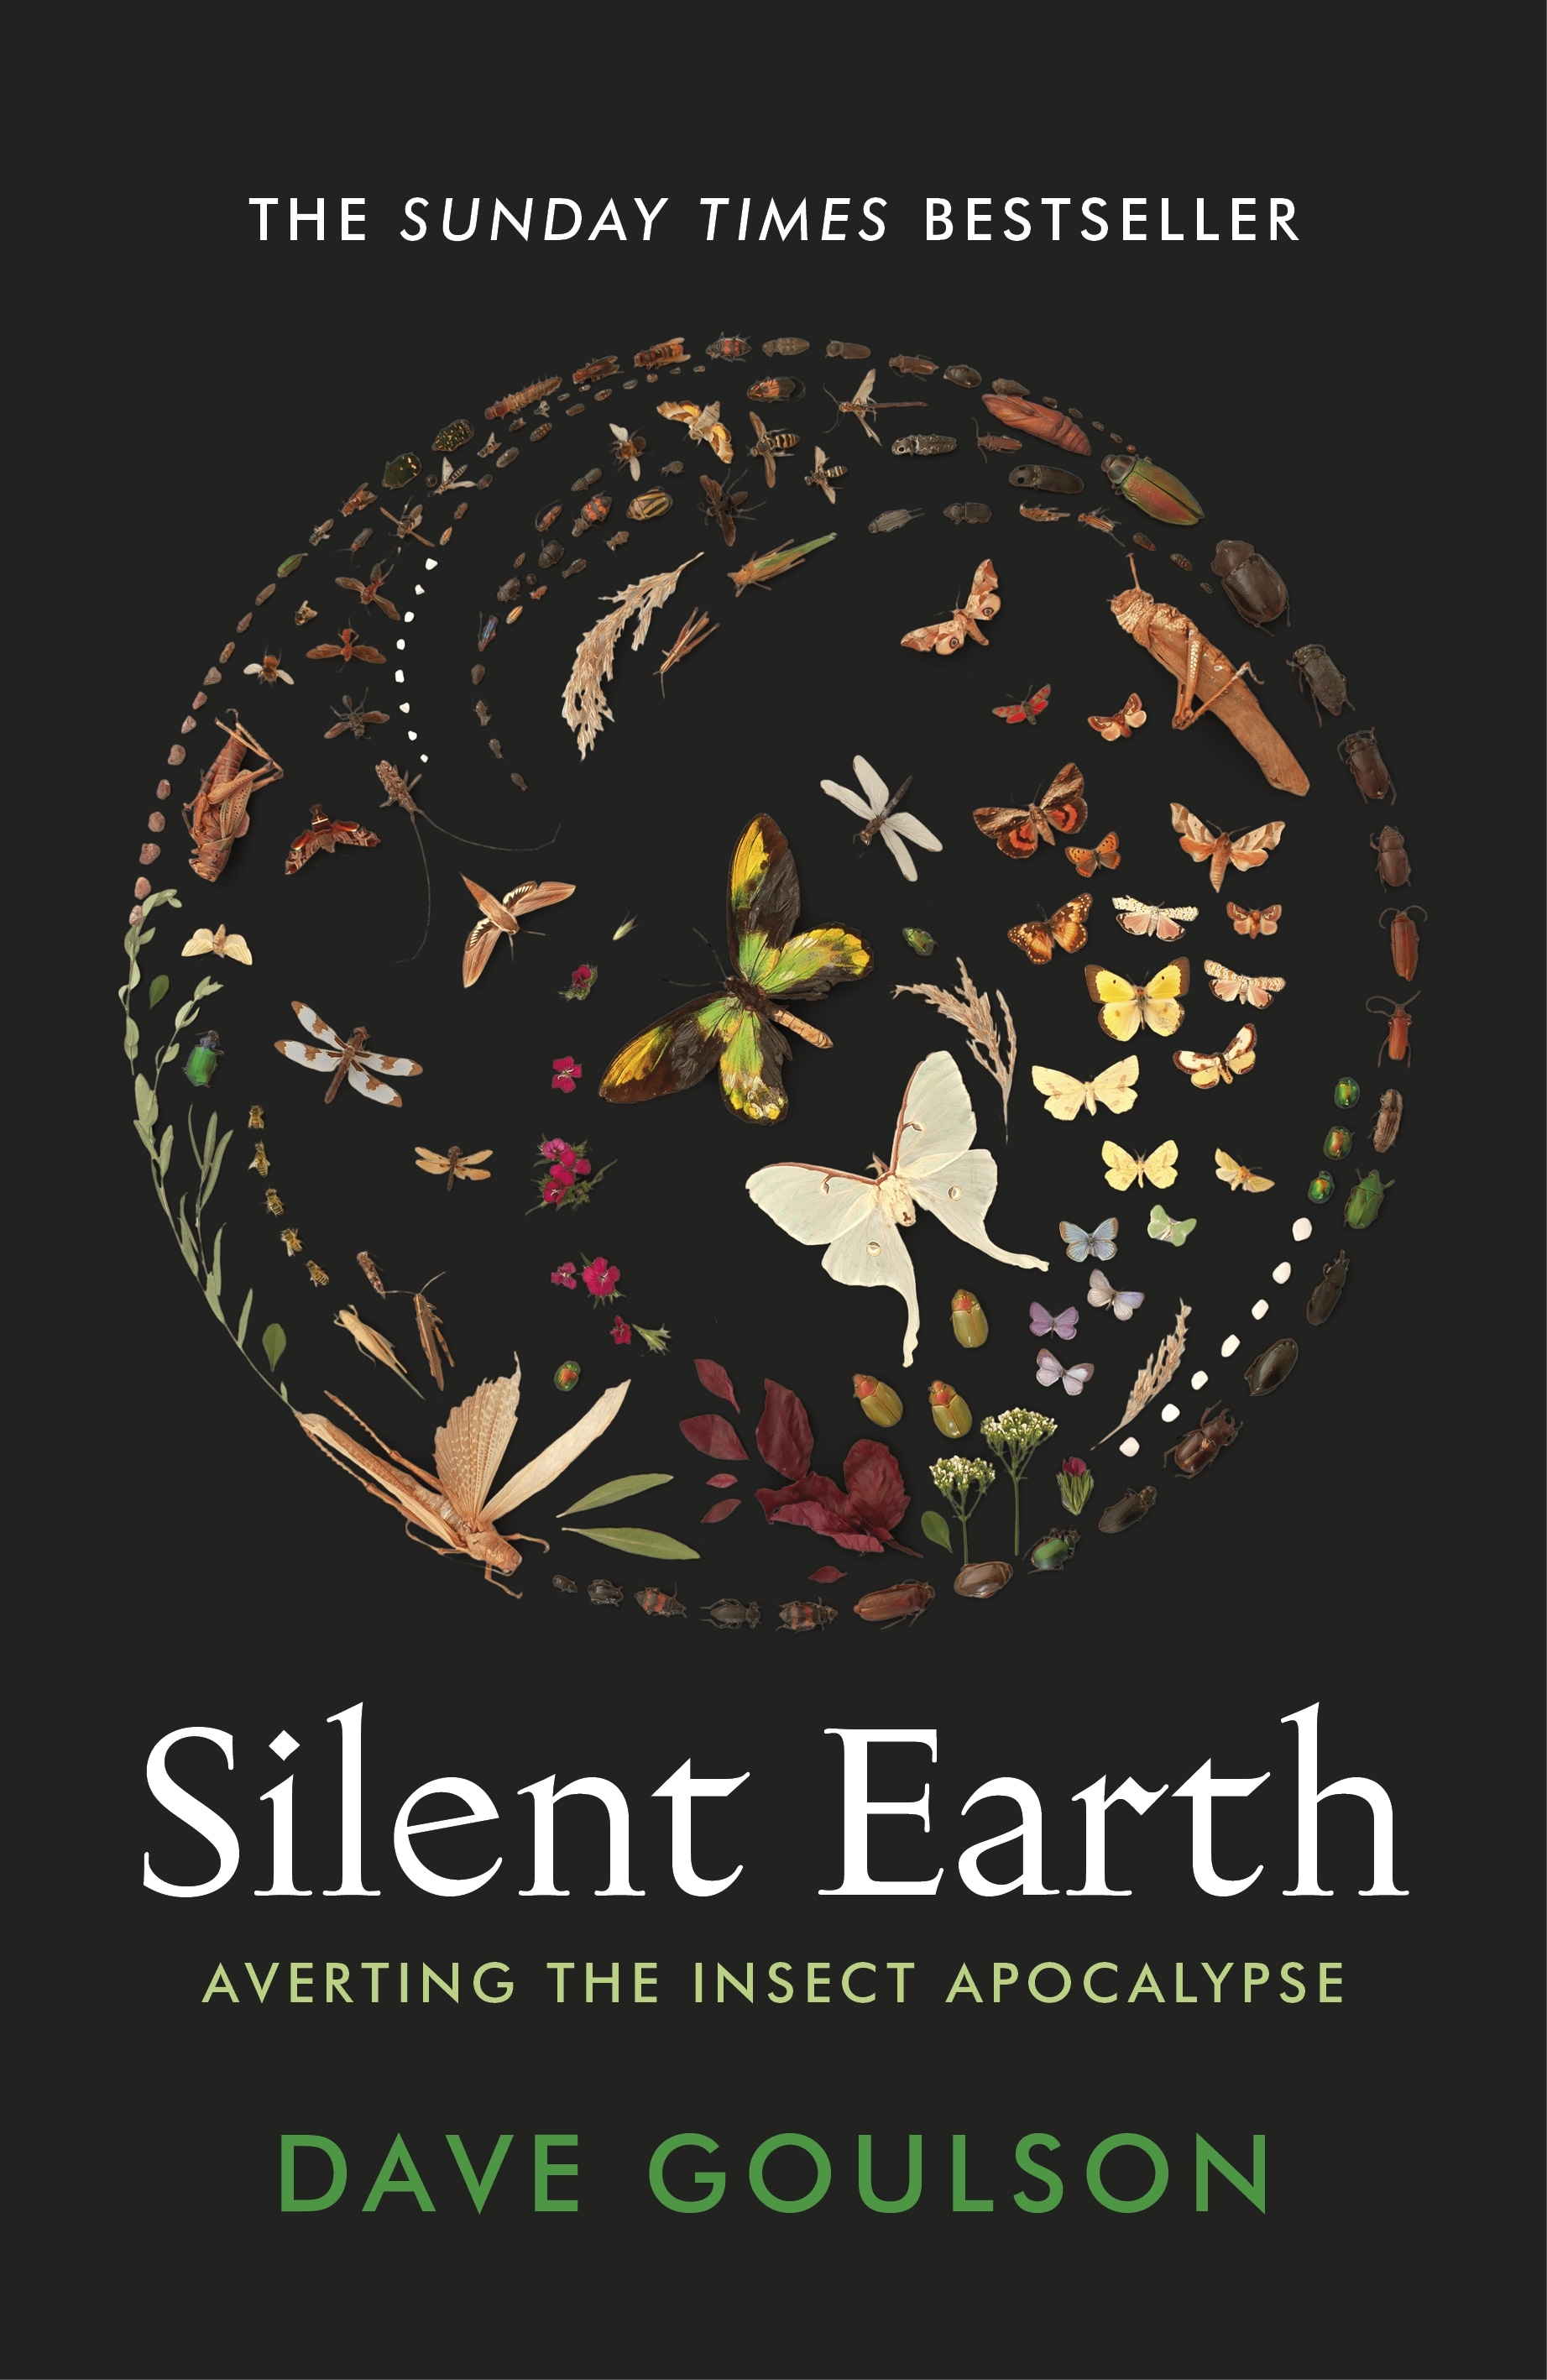 Book “Silent Earth” by Dave Goulson — August 5, 2021